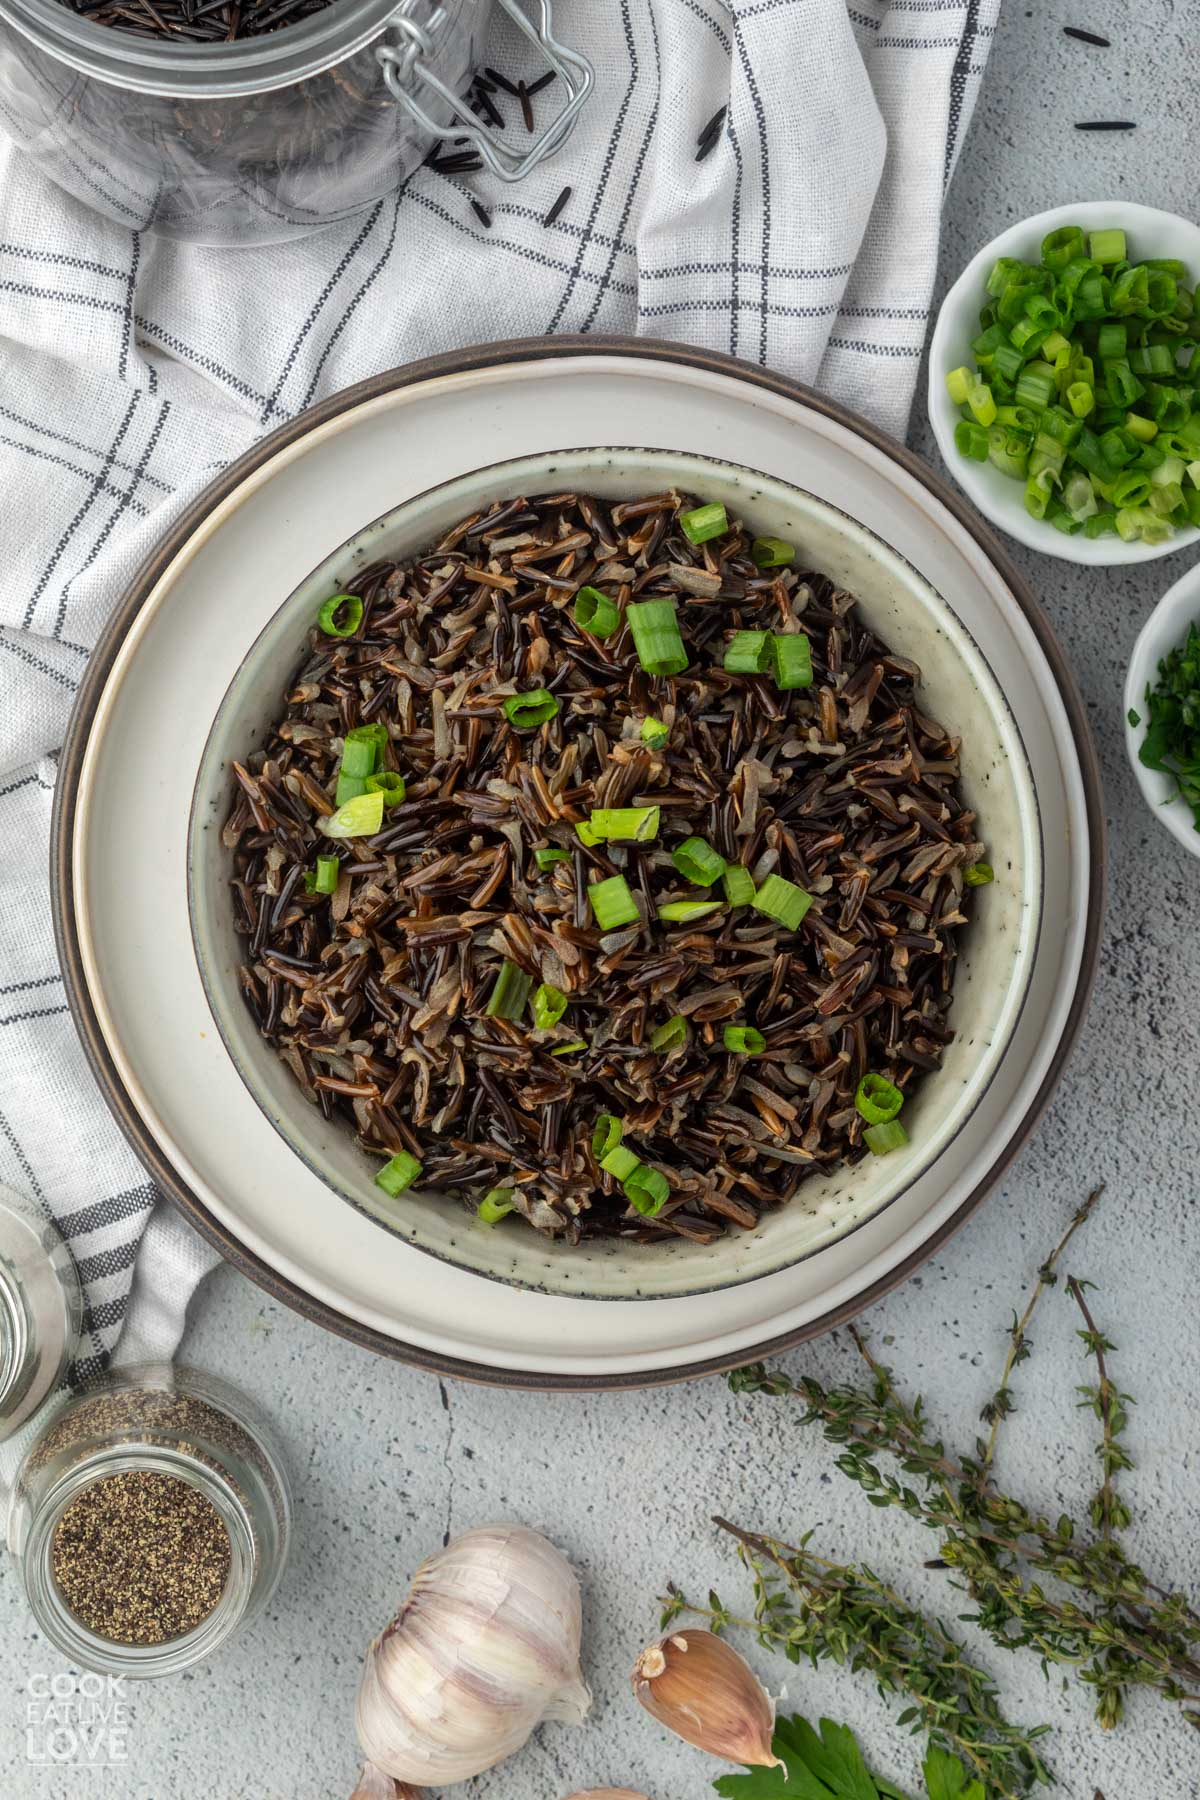 Wild rice in a bowl set on a plate on the table with little bowls of green onions and fresh herbs.